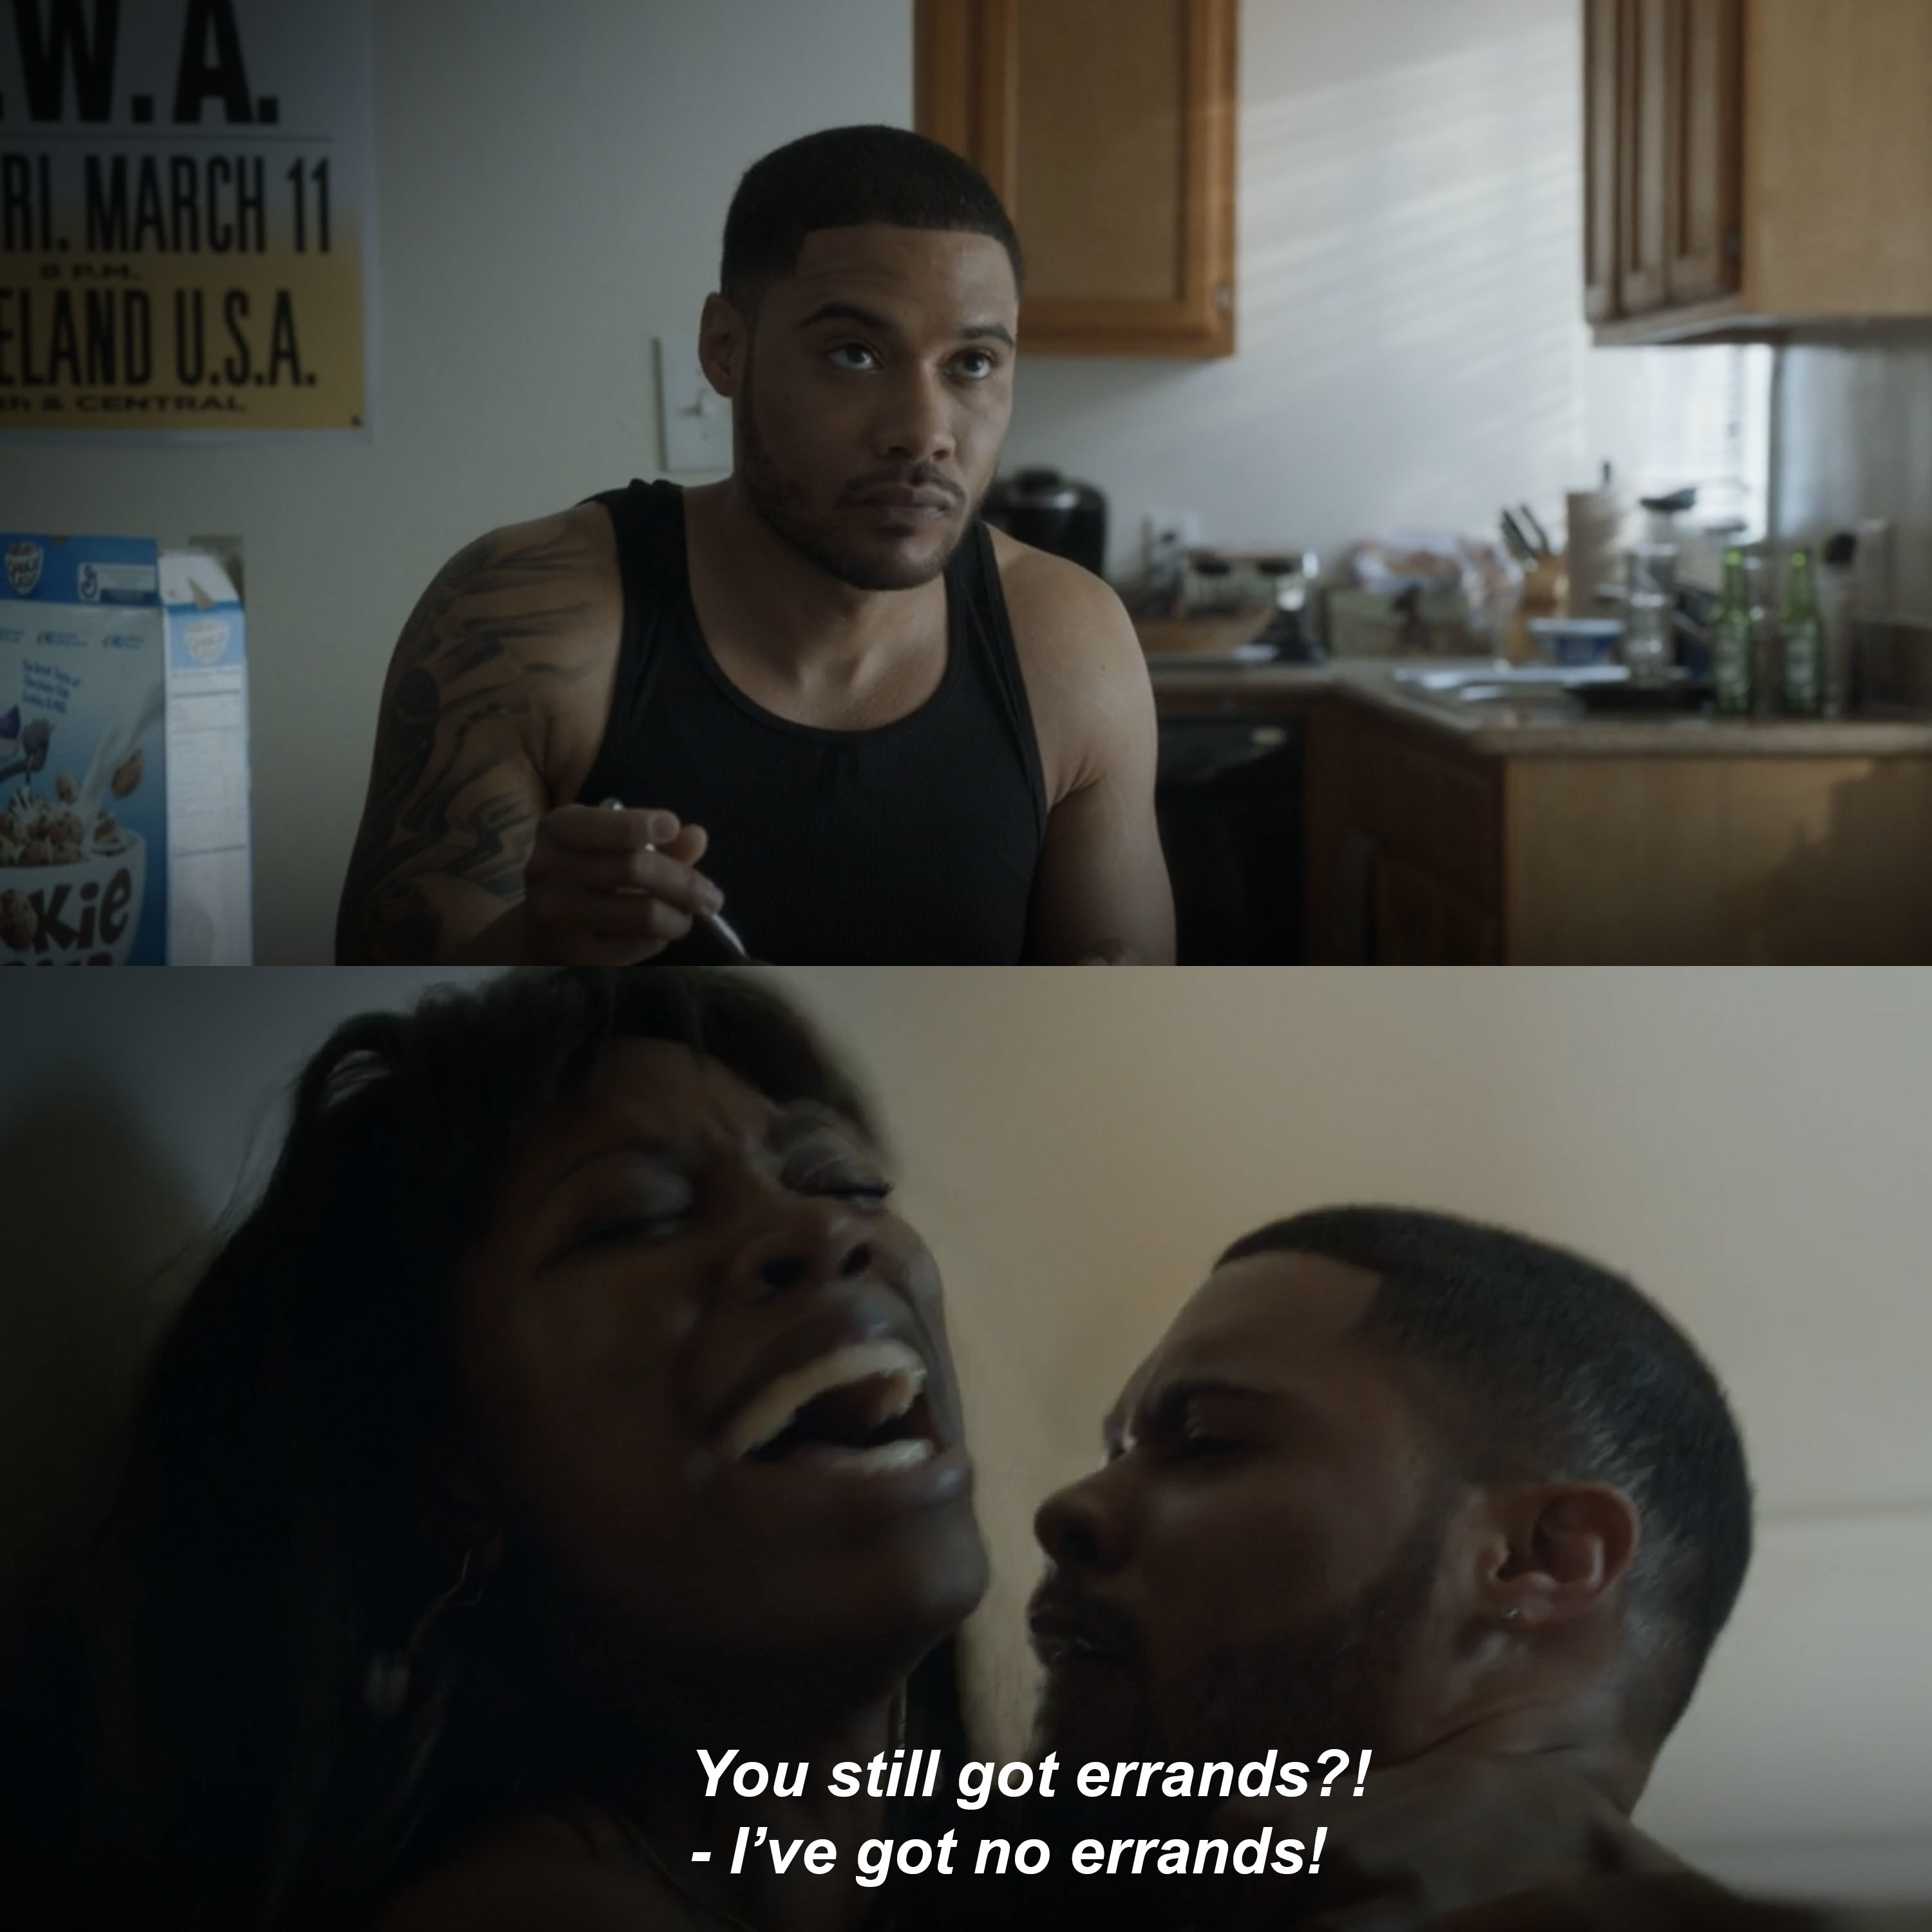 Langston Kerman as Jared eats Cookie Crisp cereal before screwing Molly against the wall in &quot;Insecure&quot;